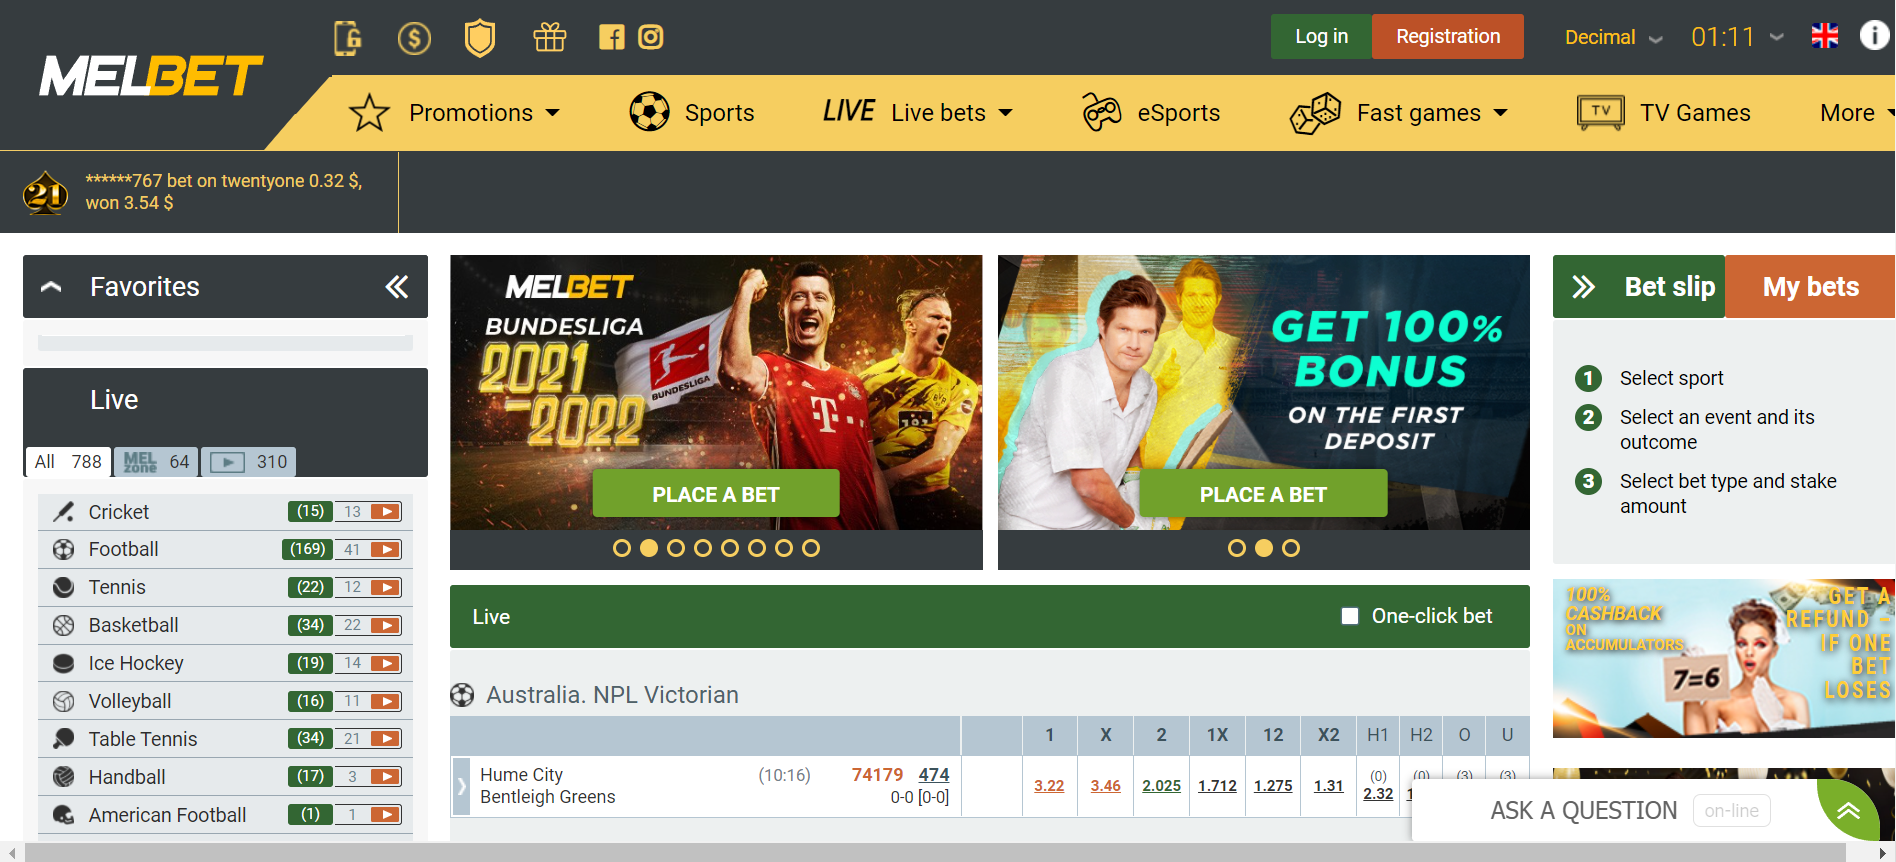 Melbet offers its users to place bets, claim bonuses and additional services as an online sportsbook.